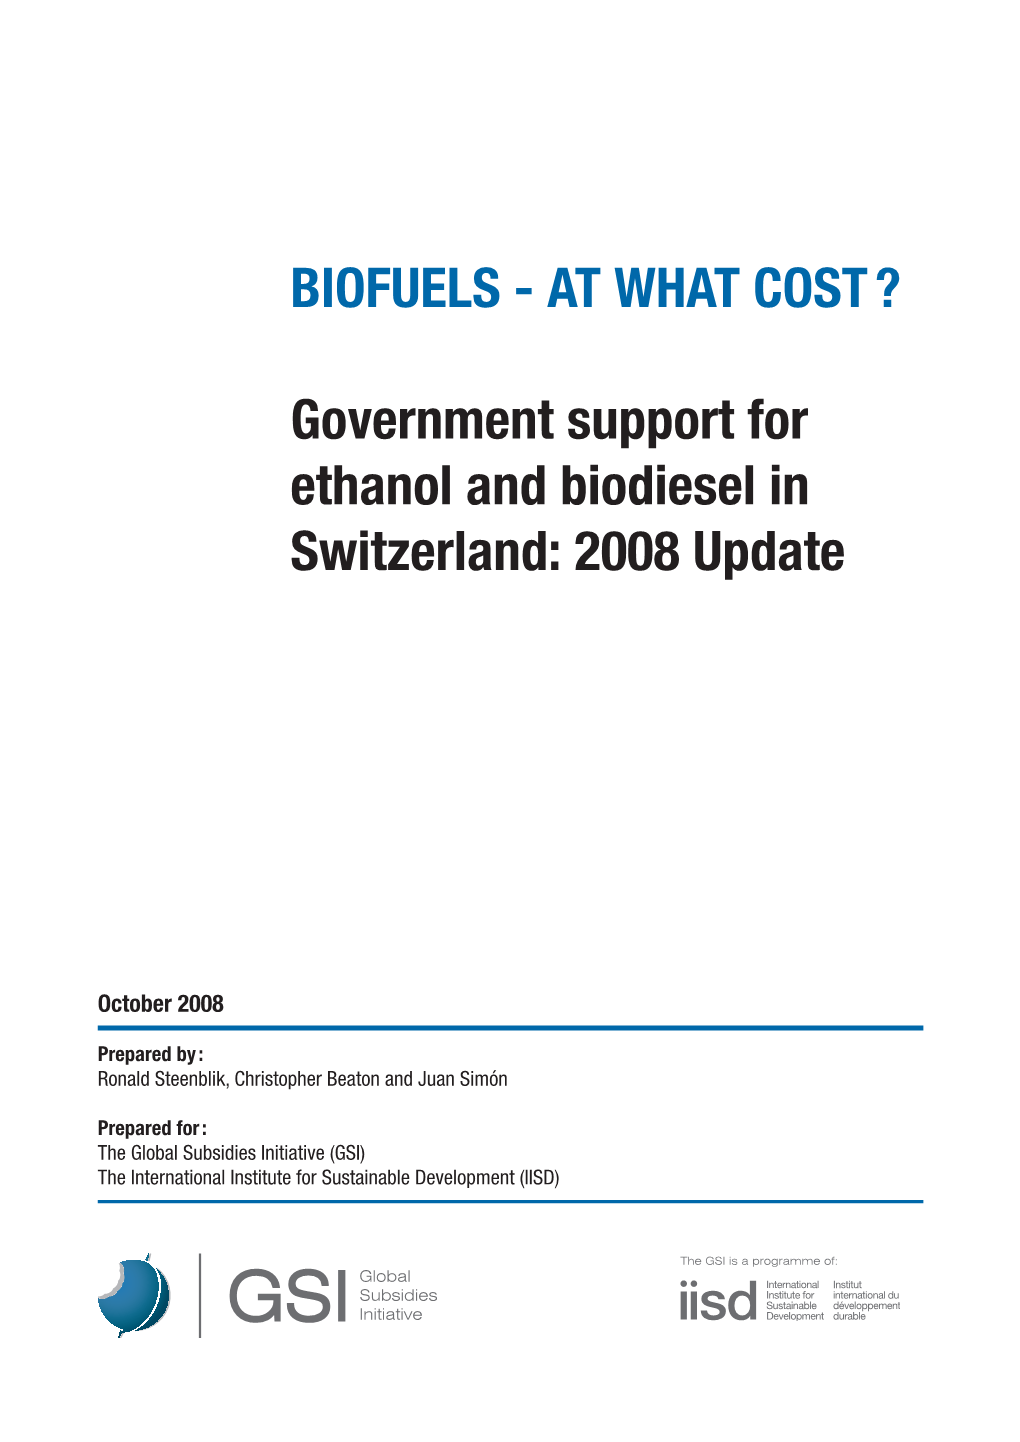 Government Support for Ethanol and Biodiesel in Switzerland: 2008 Update